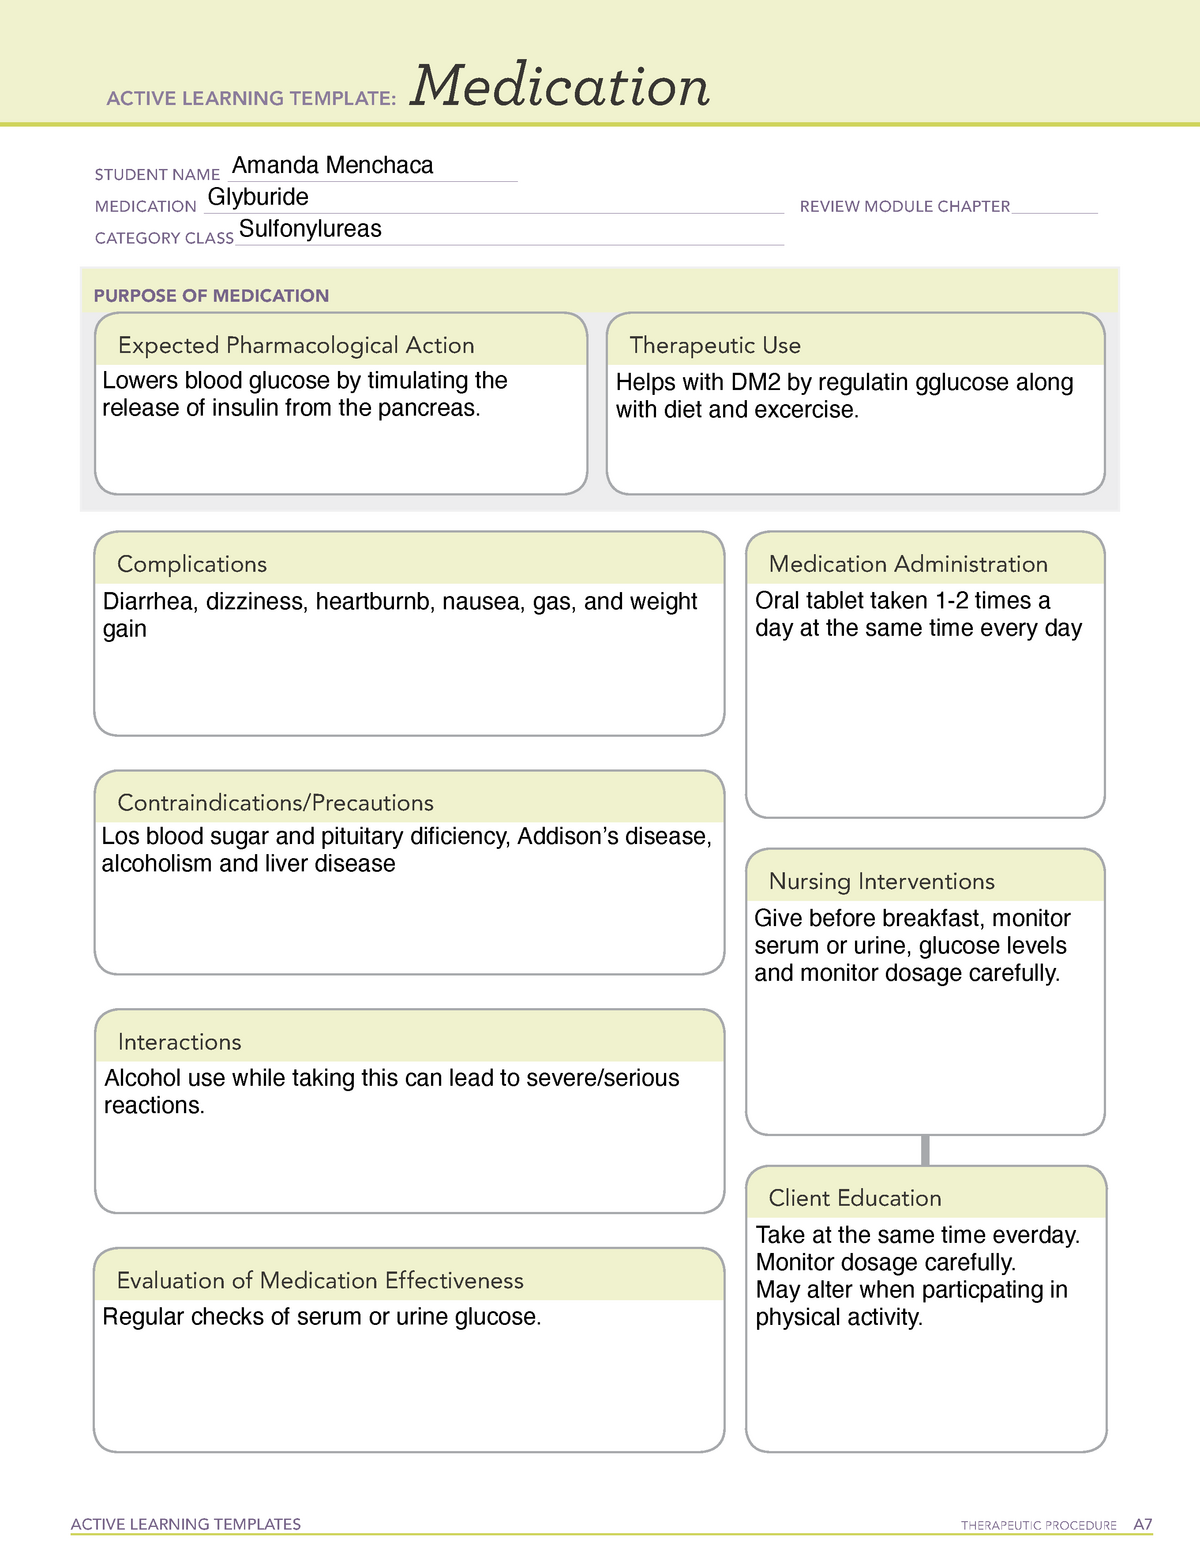 Glyburide ATI medication card template ACTIVE LEARNING TEMPLATES